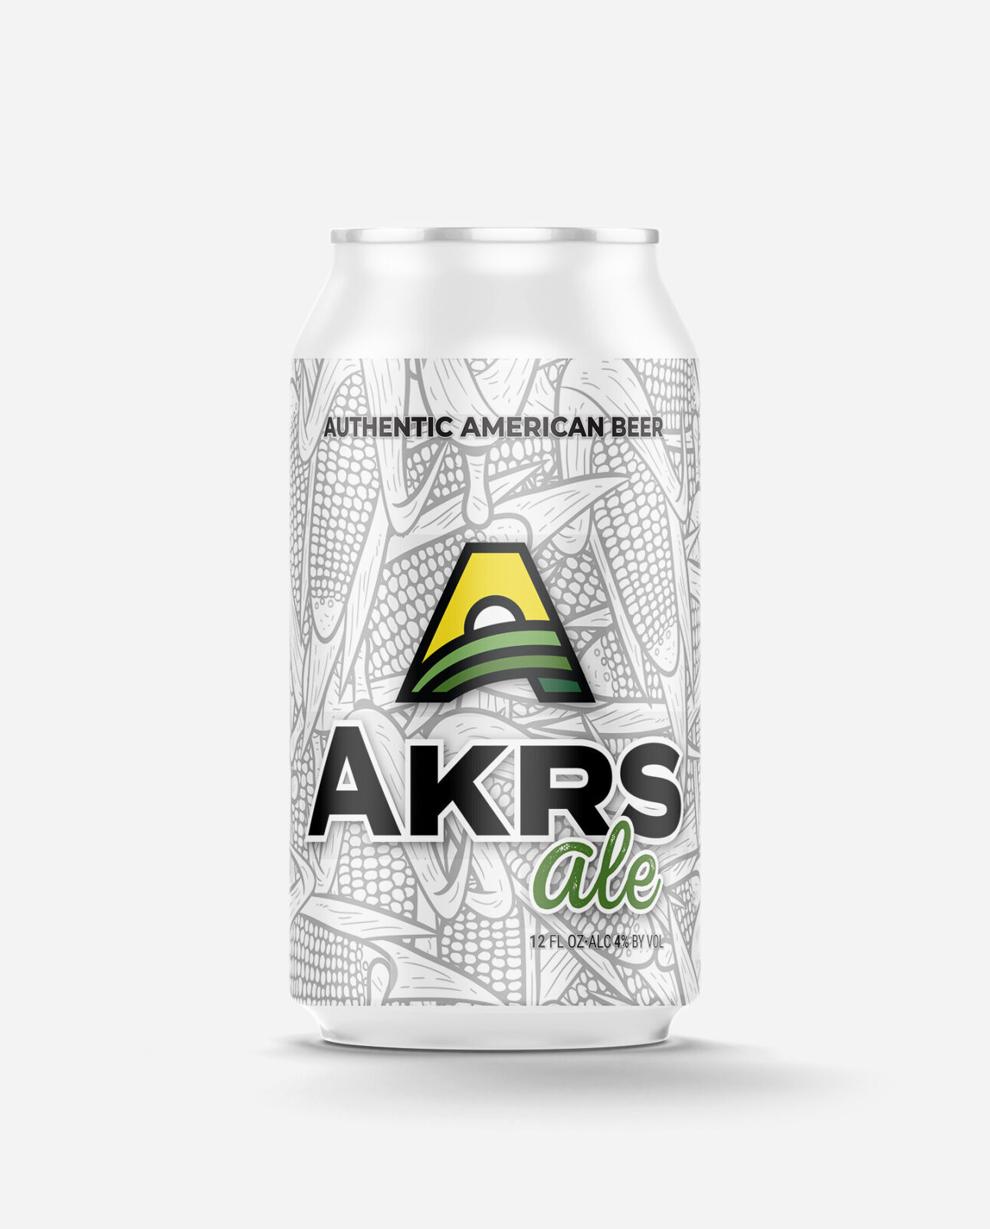 AKRS Ale is a collaboration between Zipline Brewing Co. and AKRS Equipment Solutions.